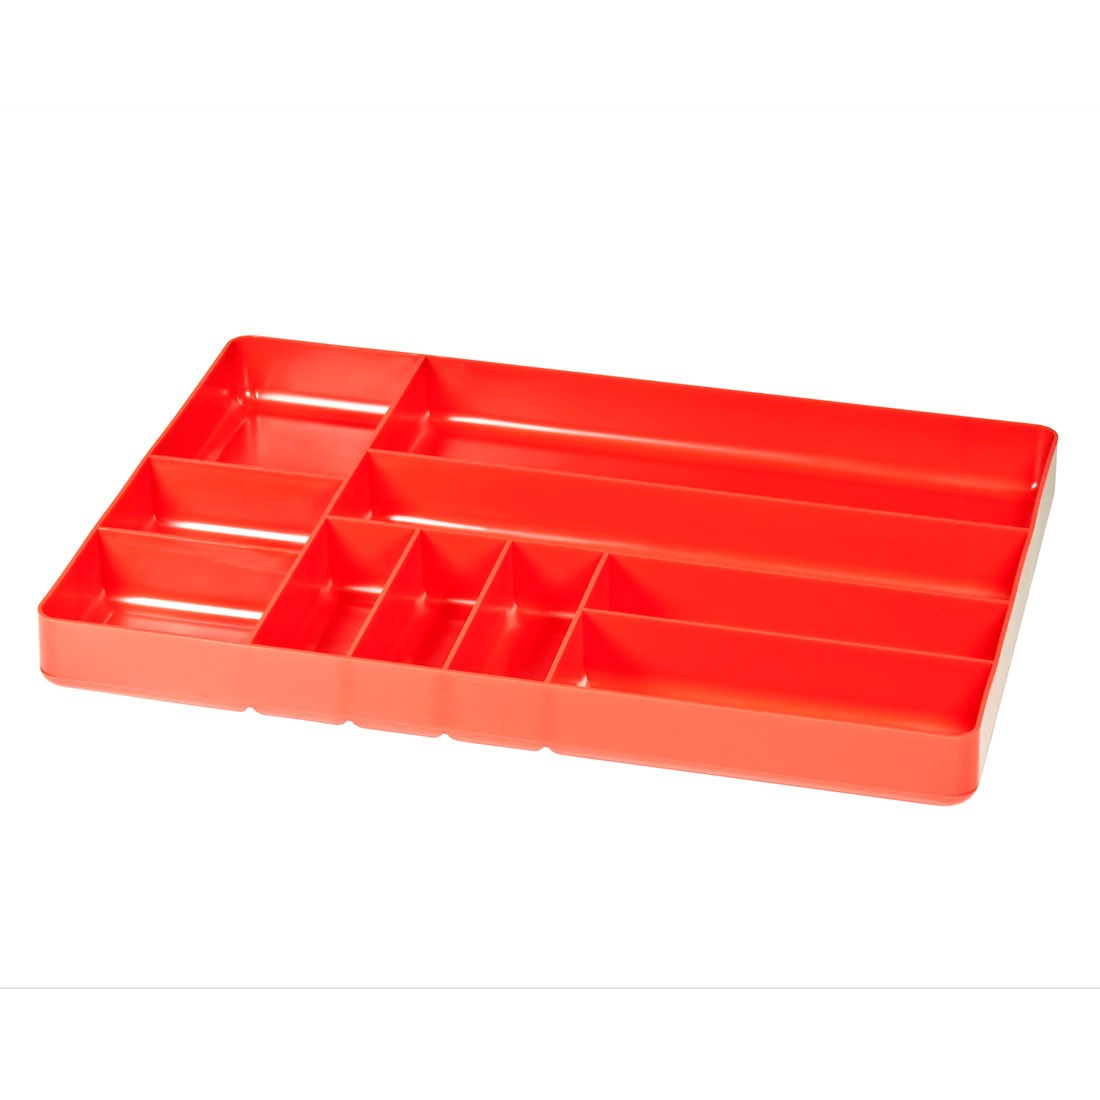 http://www.ernstmfg.com/shared/images/product/5010_ten-compartment-organizer-tray_red-1100_1.jpg